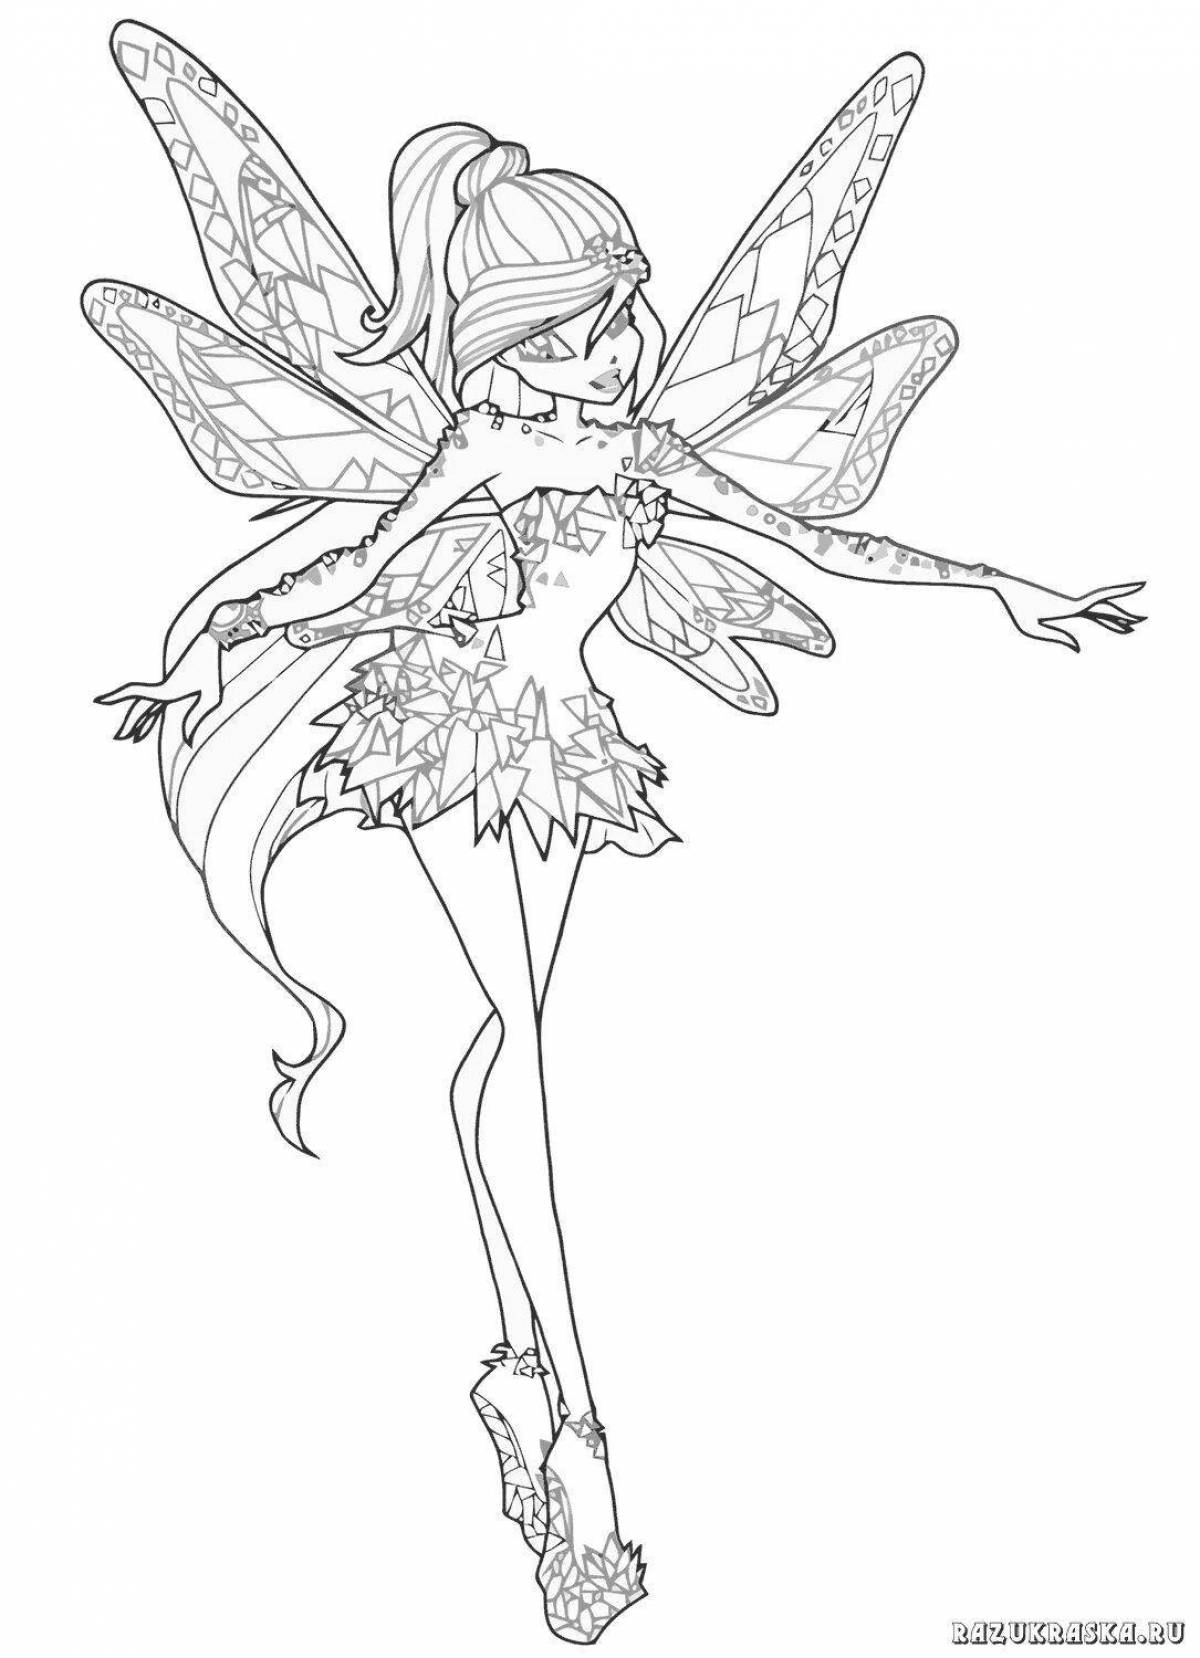 Terrific tynix winx coloring page